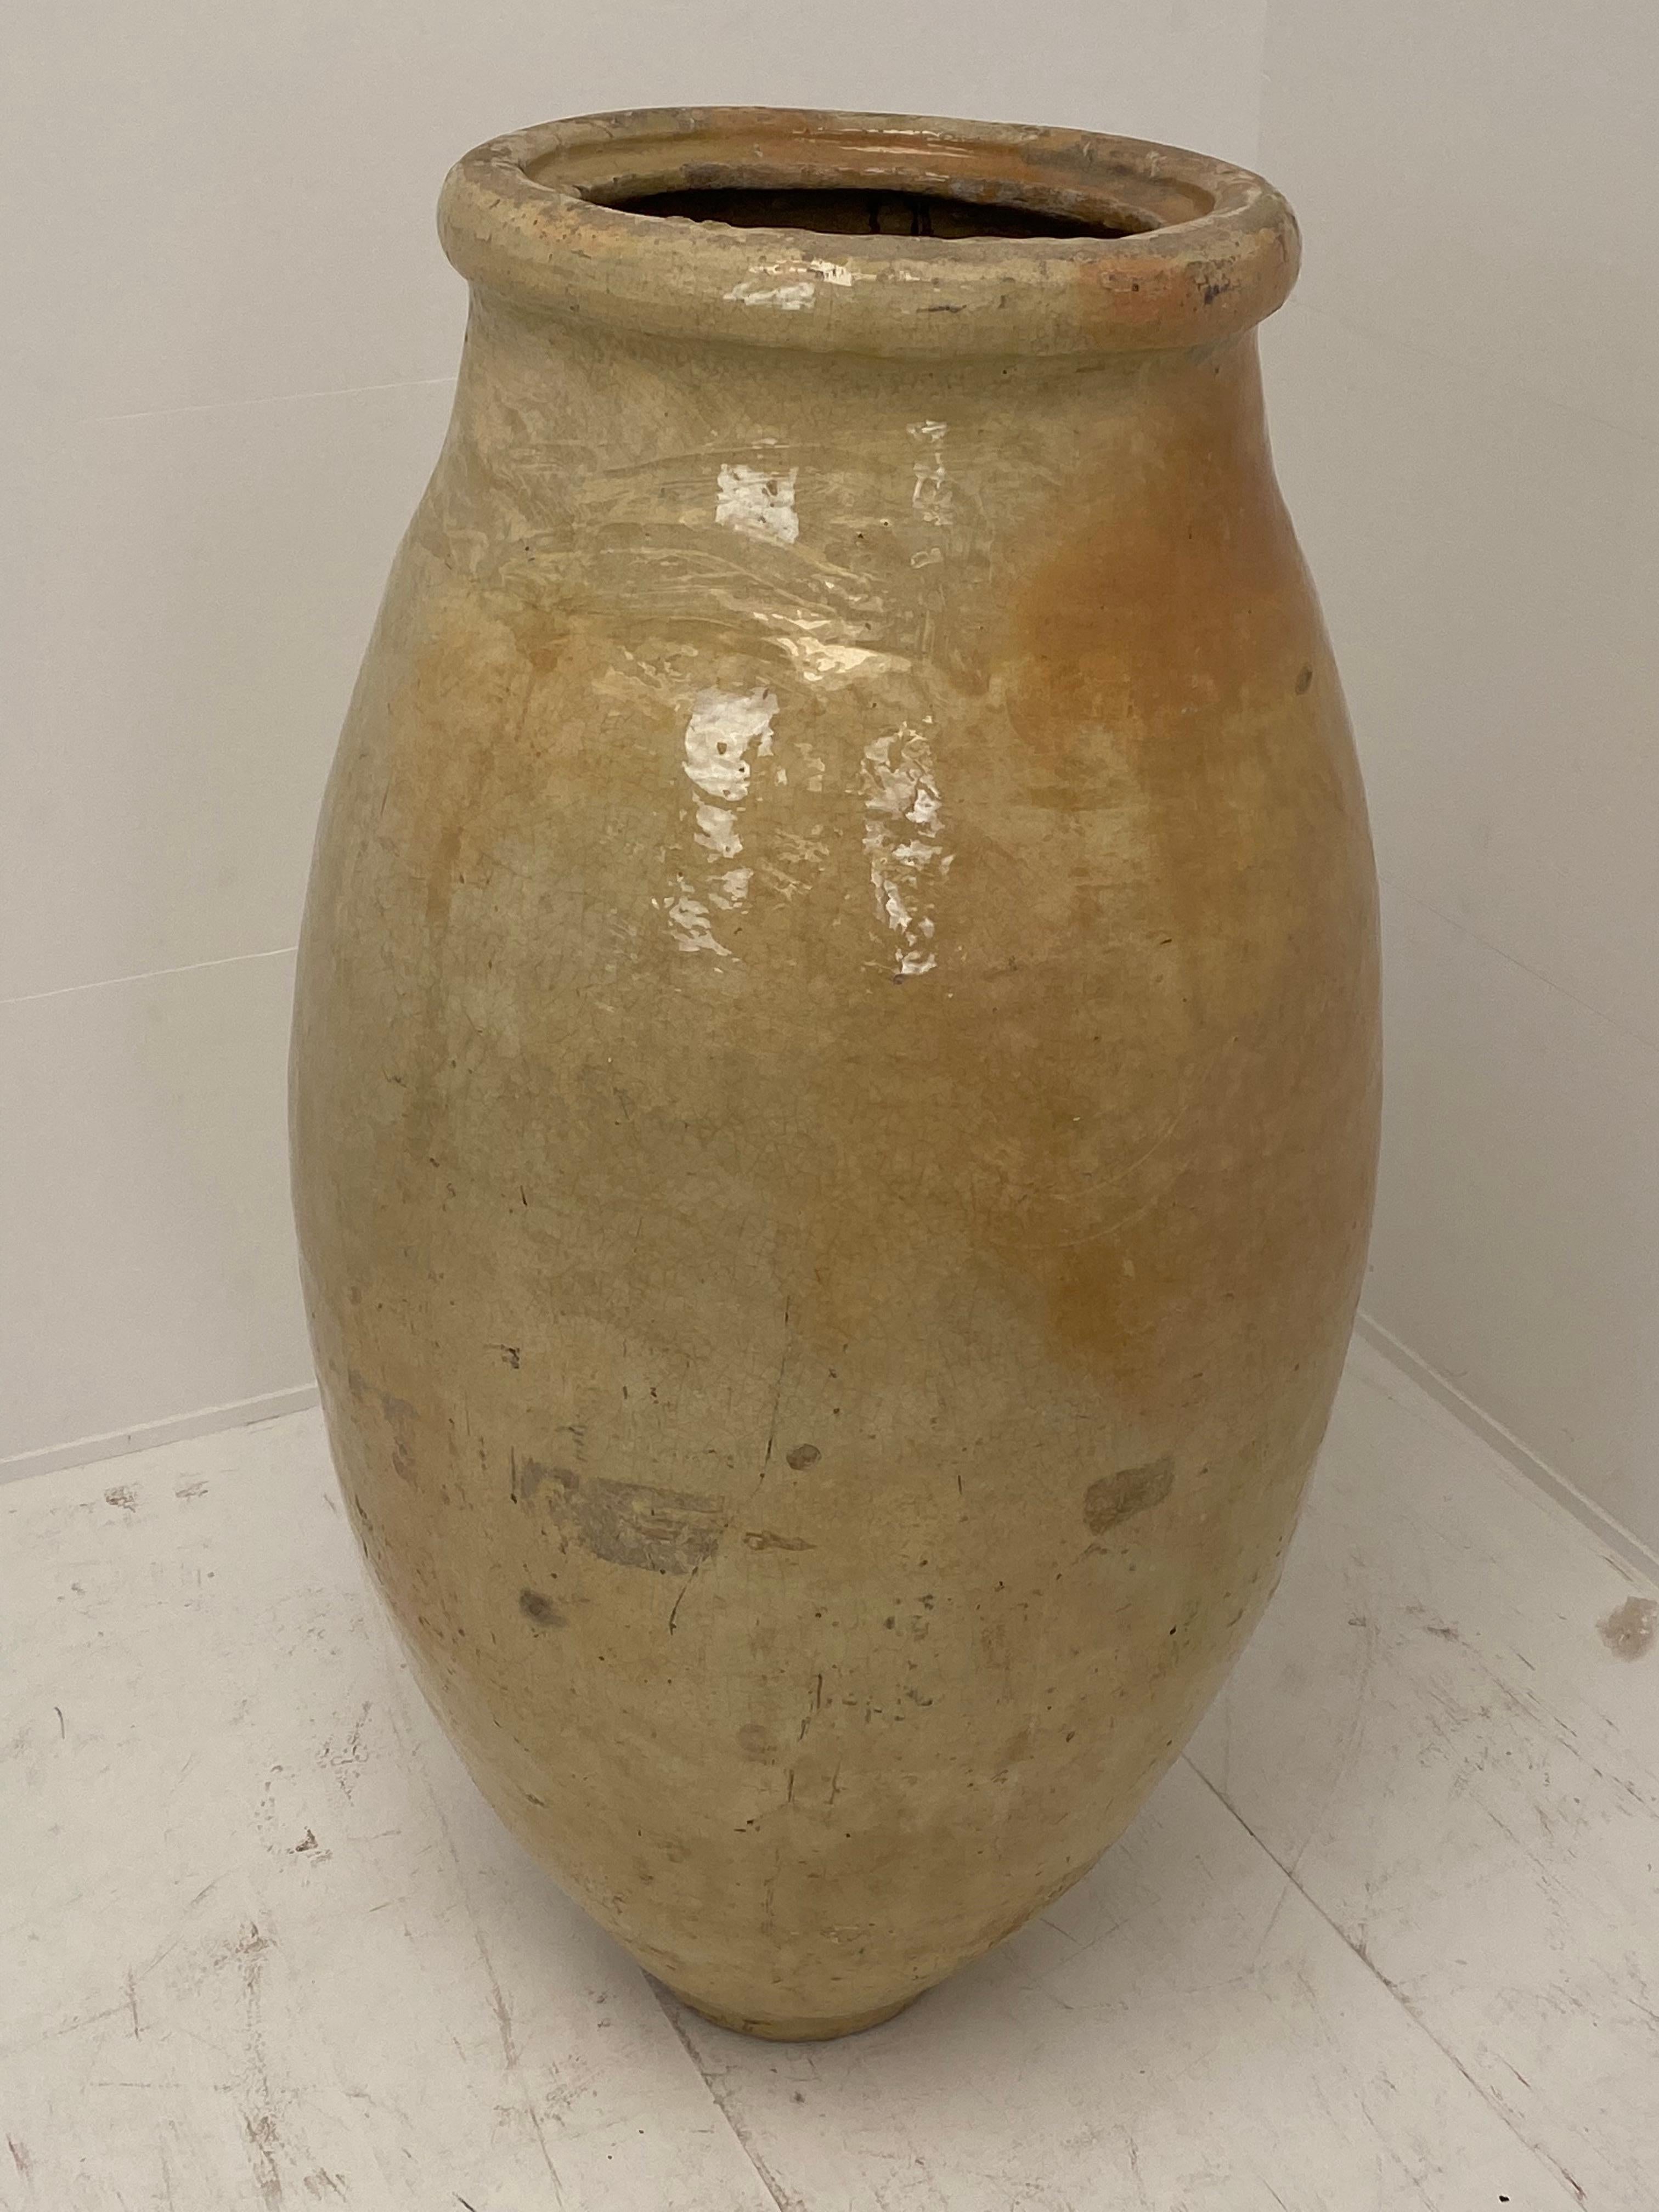 Polished Large Antique Terracotta Jar on Iron Stand  from Spain